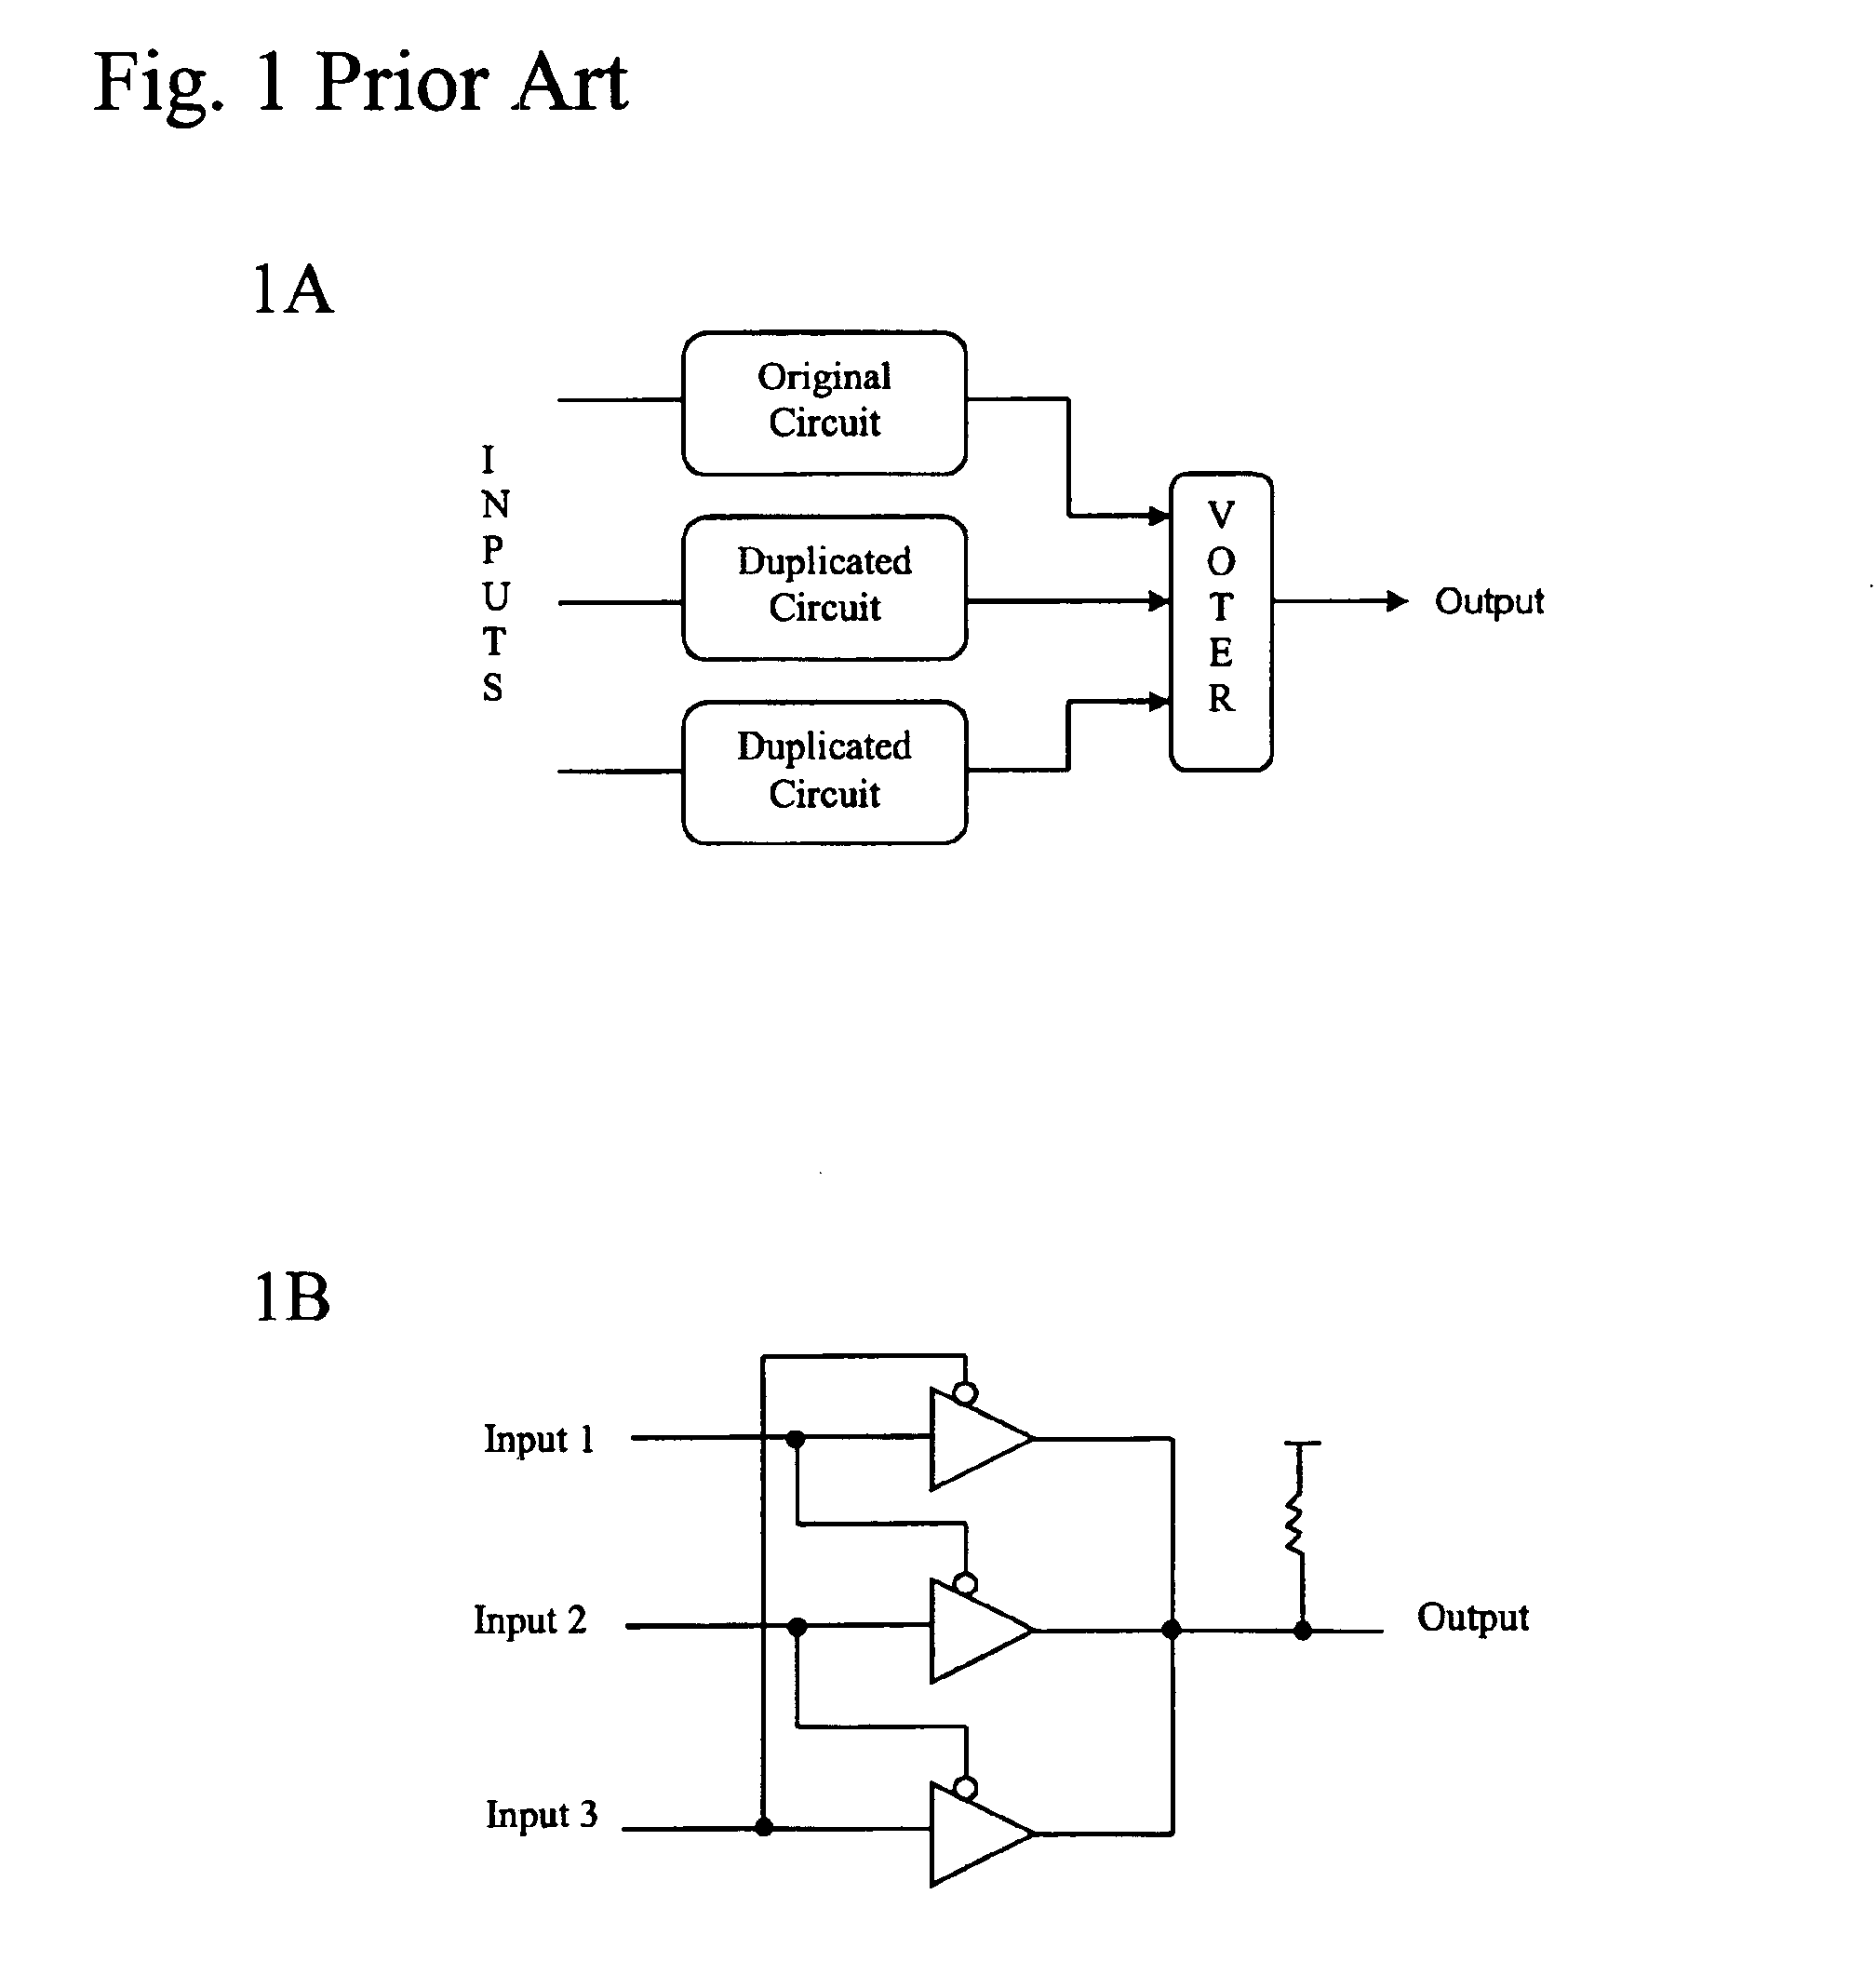 Method and apparatus for creating circuit redundancy in programmable logic devices